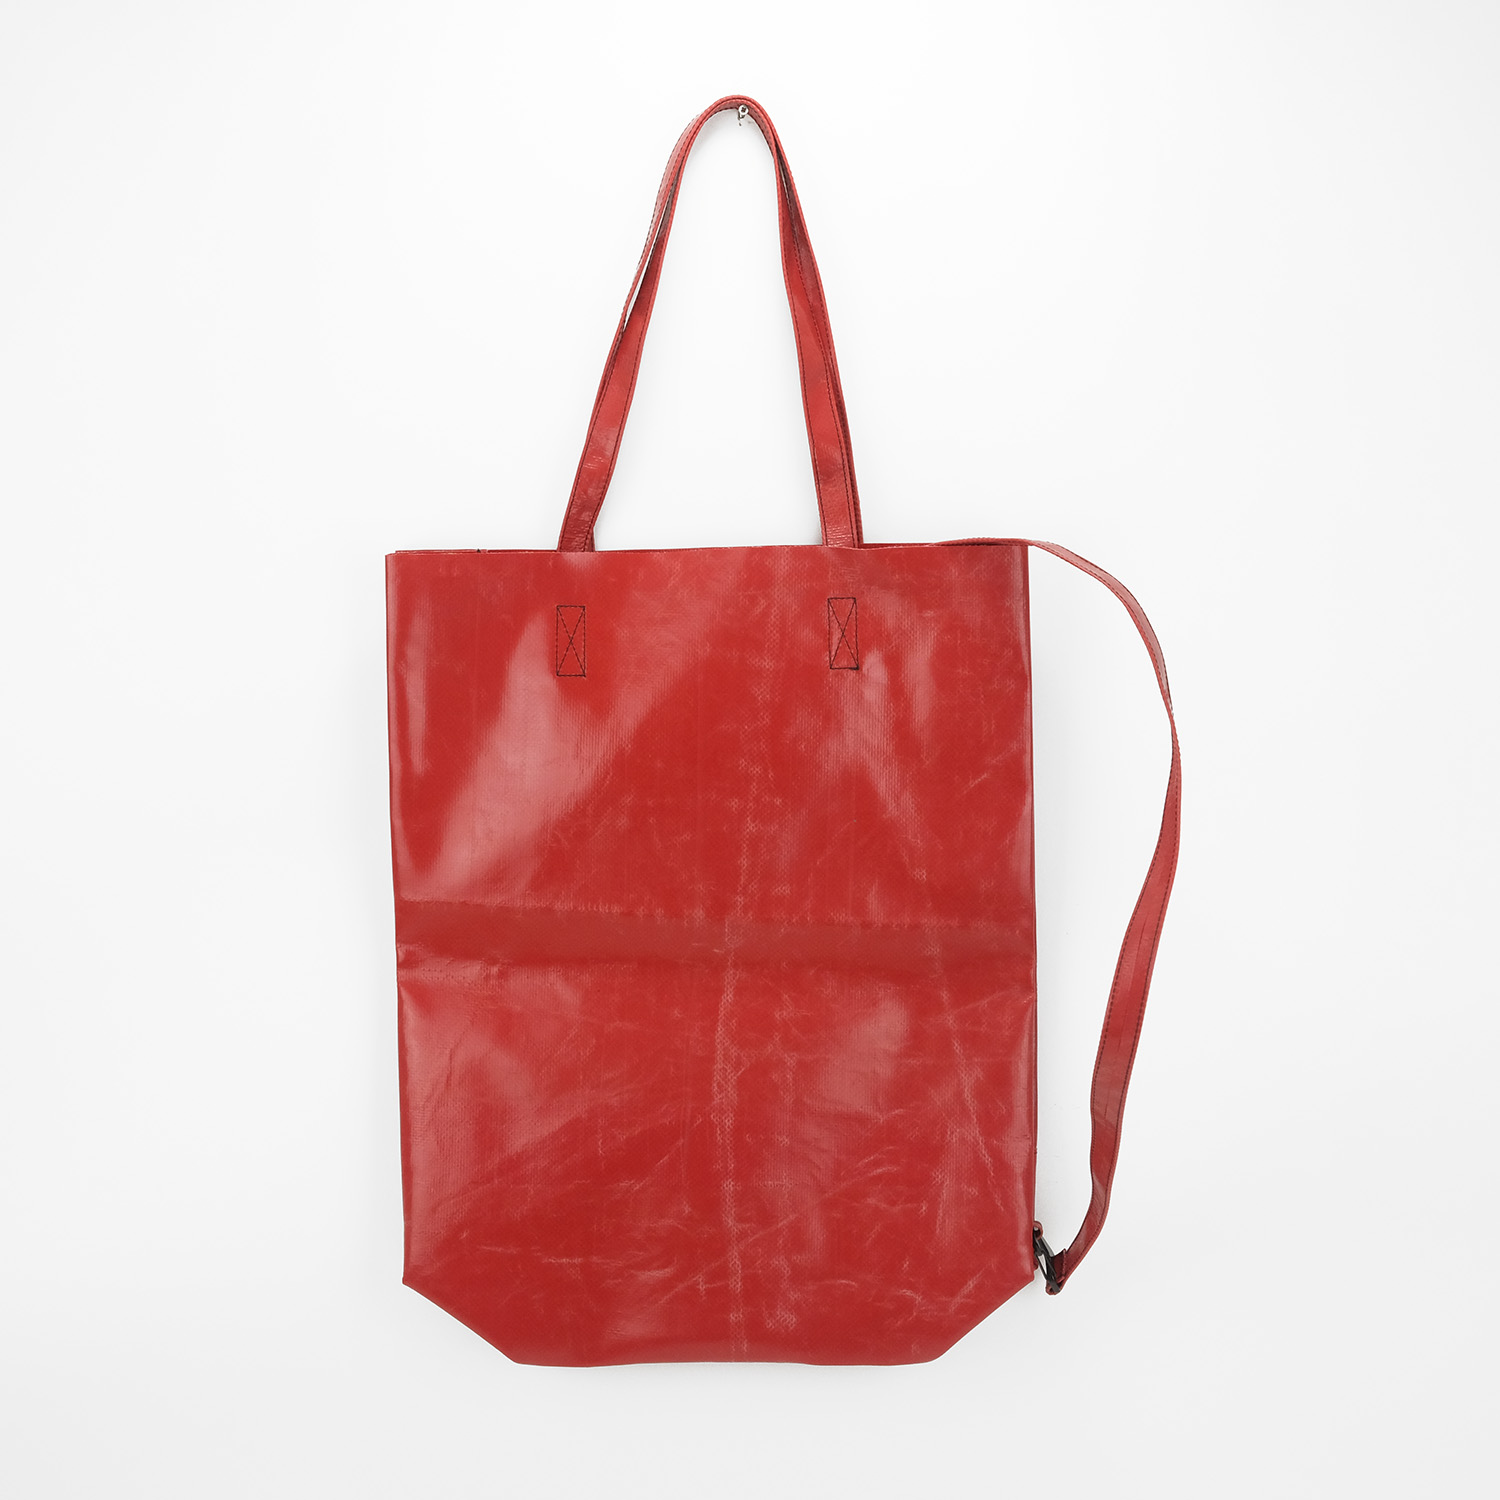 FREITAG :: F262 JULIEN :: The medium tote which can be worn as a backpack..